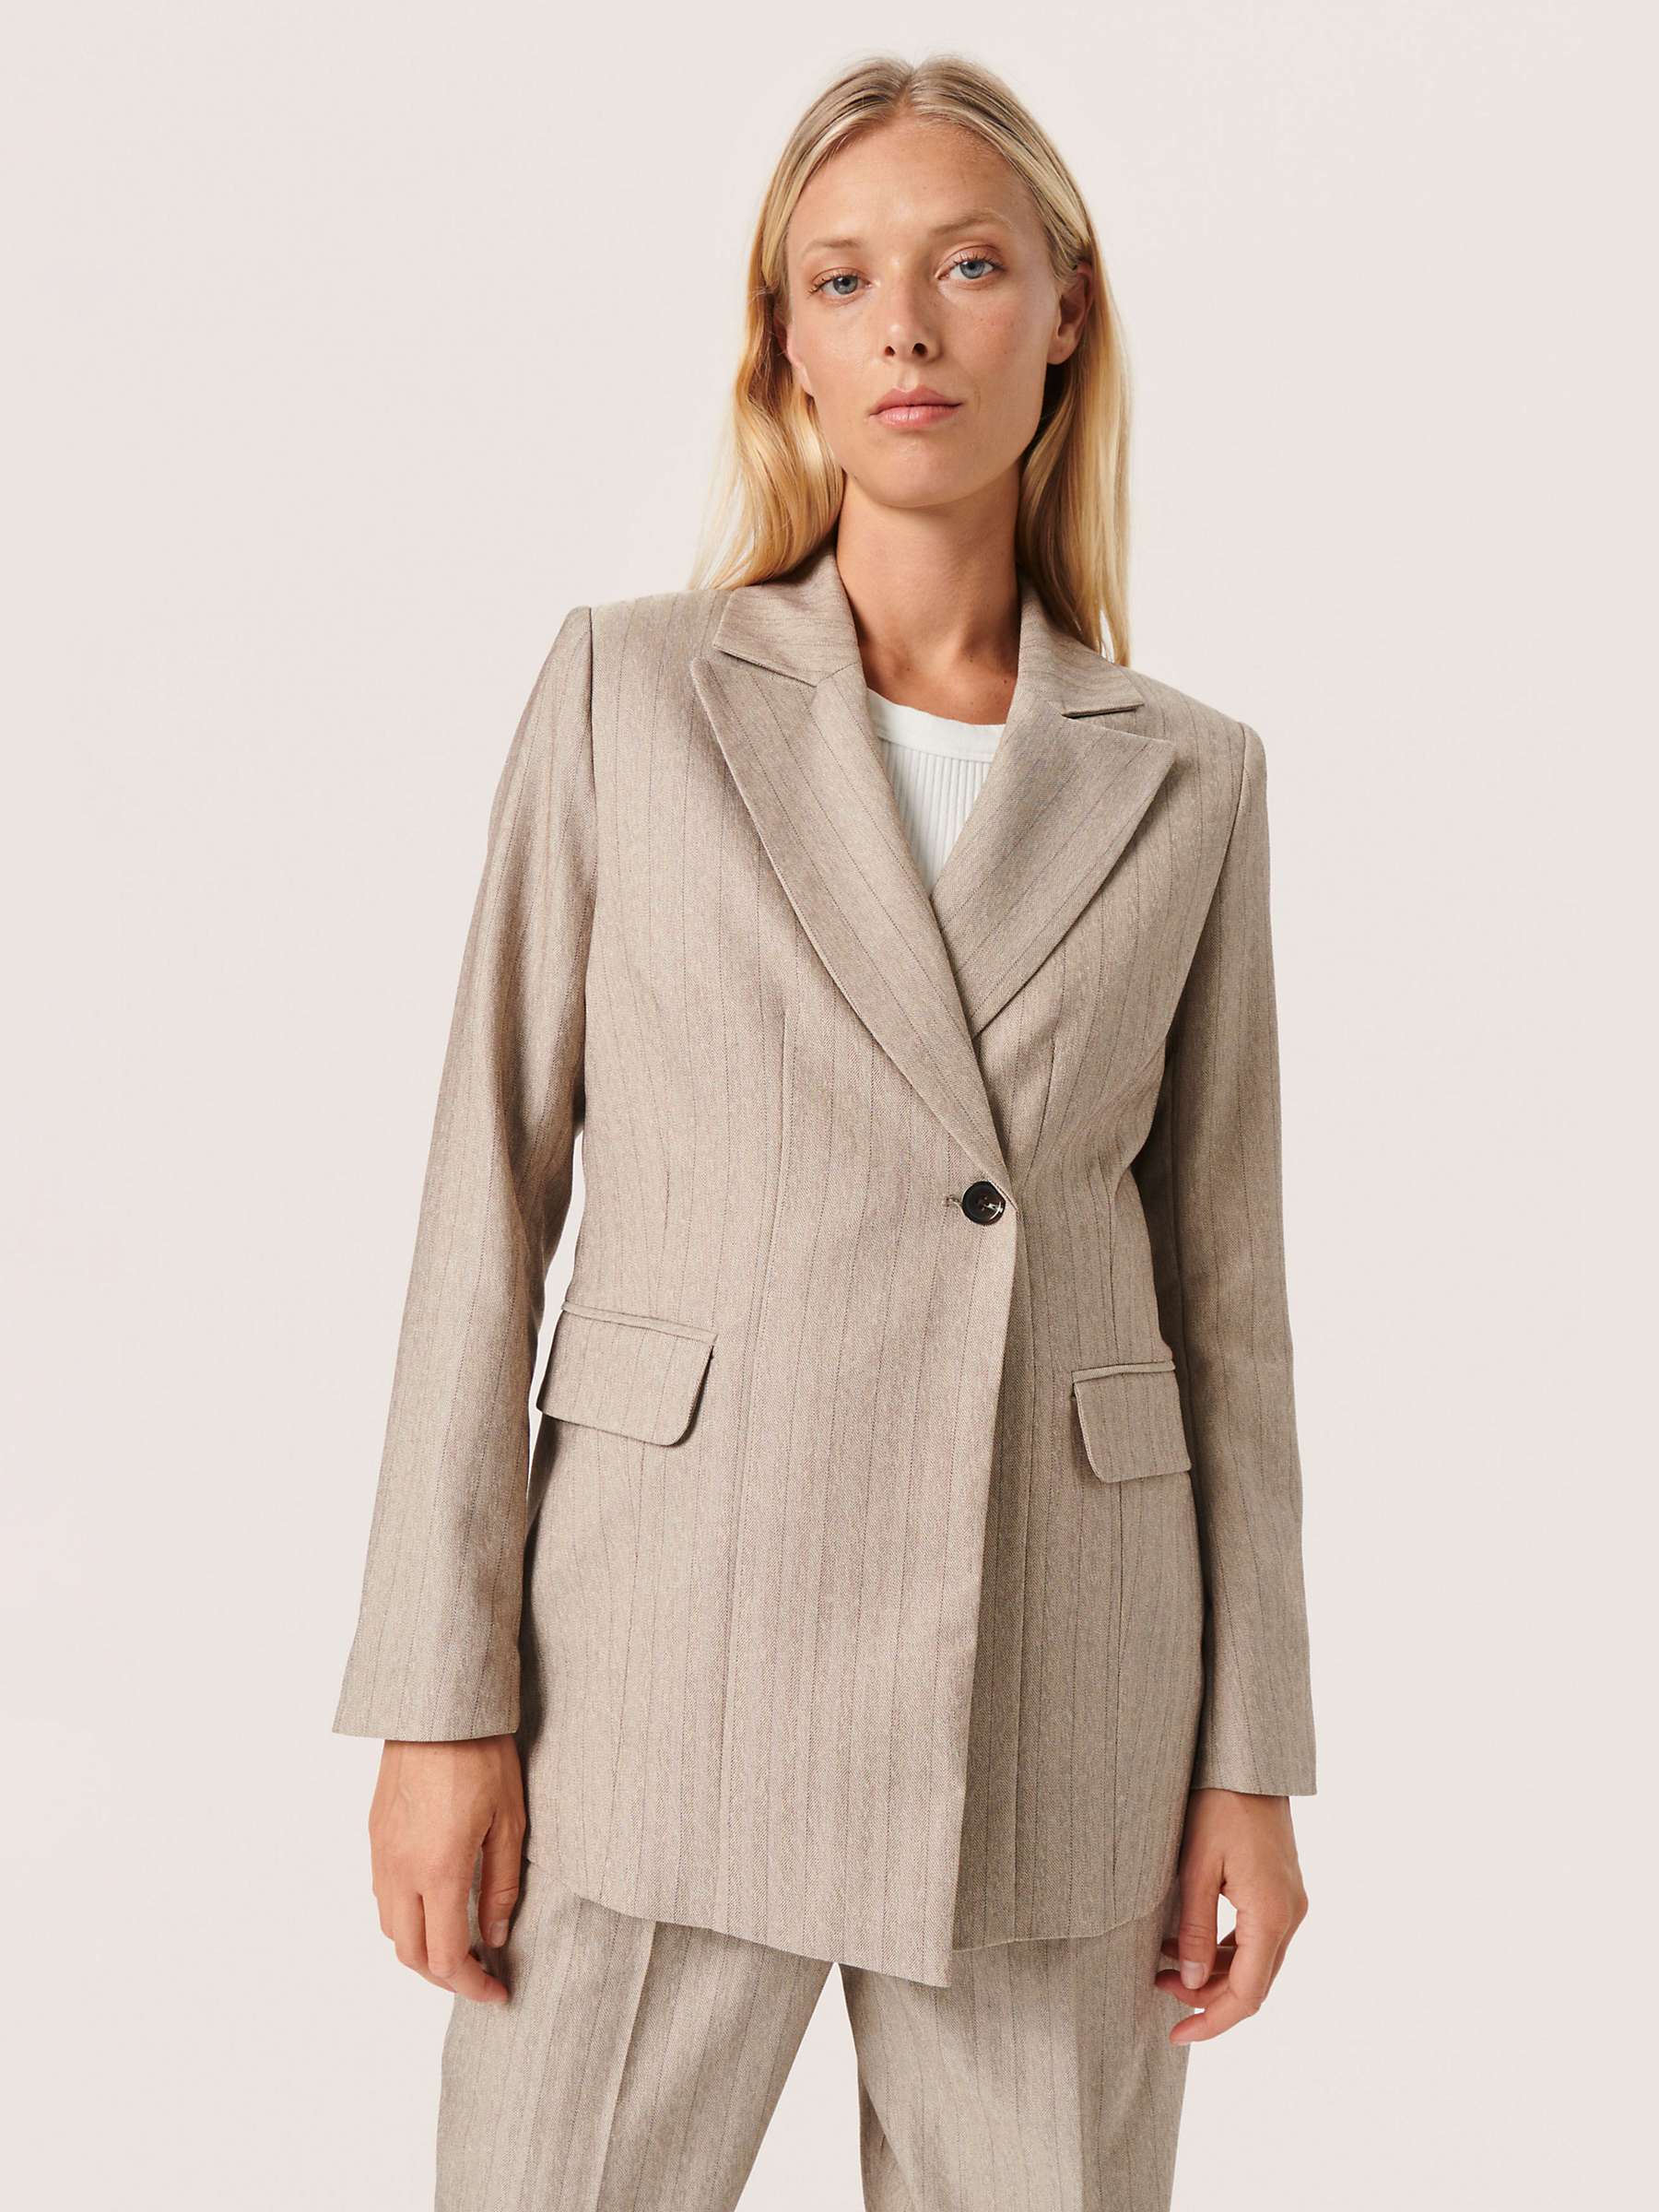 Buy Soaked In Luxury Charvi Notch Lapel Fitted Blazer, Stripe Online at johnlewis.com